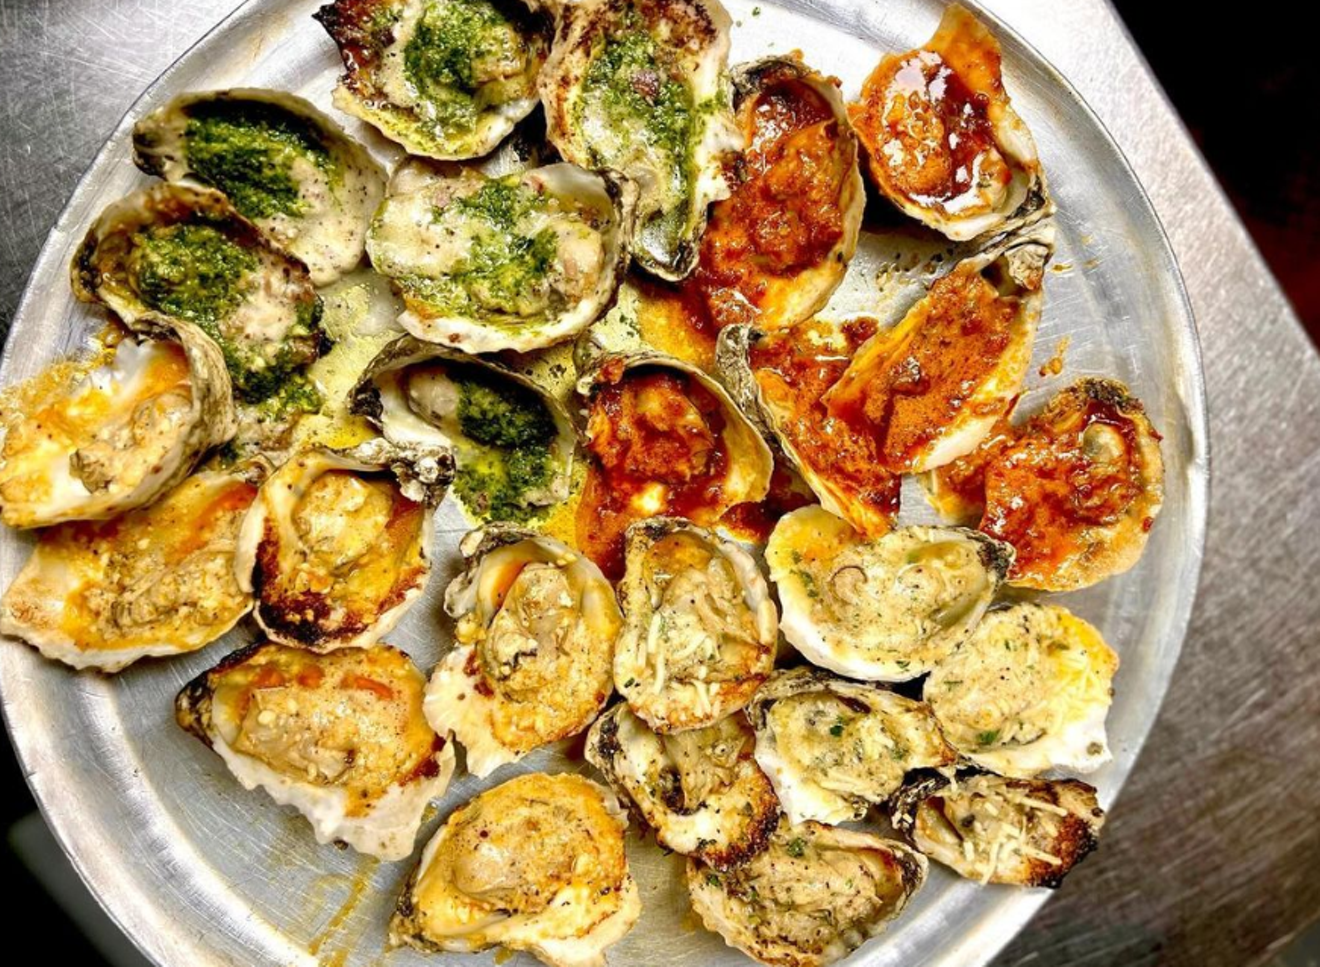 The chargrilled oysters from Angelo's are one of the best parts of its happy hour lineup.